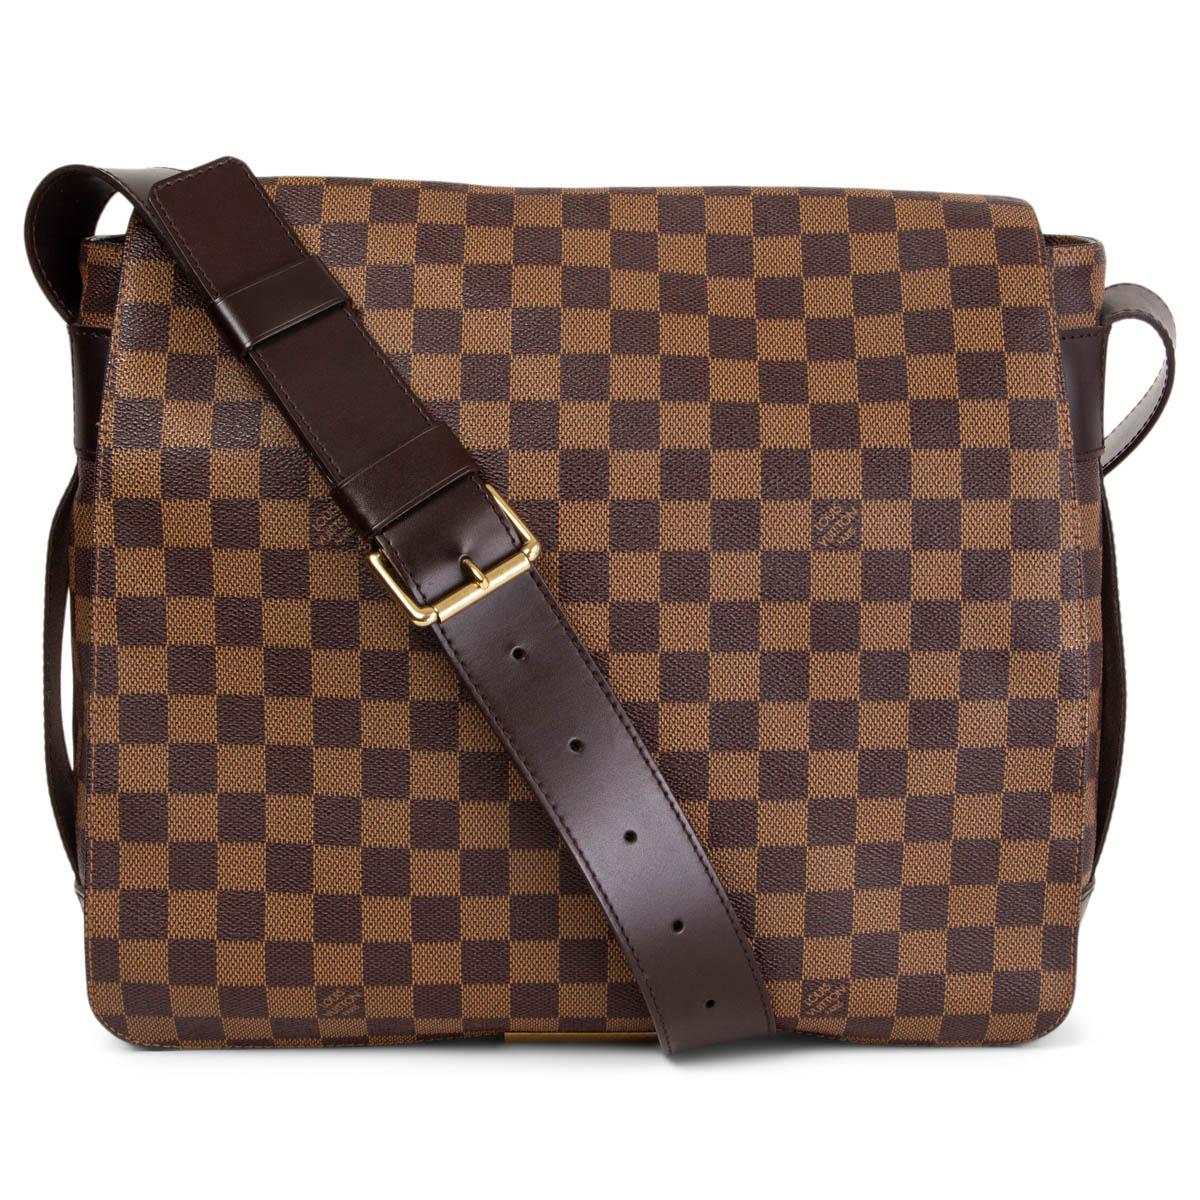 100% authentic Louis Vuitton Bastille messenger bag in Ebene brown Damier canvas with details in dark brown leather. Two pockets on the outside underneath the flap. Lined in terra cotta canvas with an open pocket against the back. Has been carried